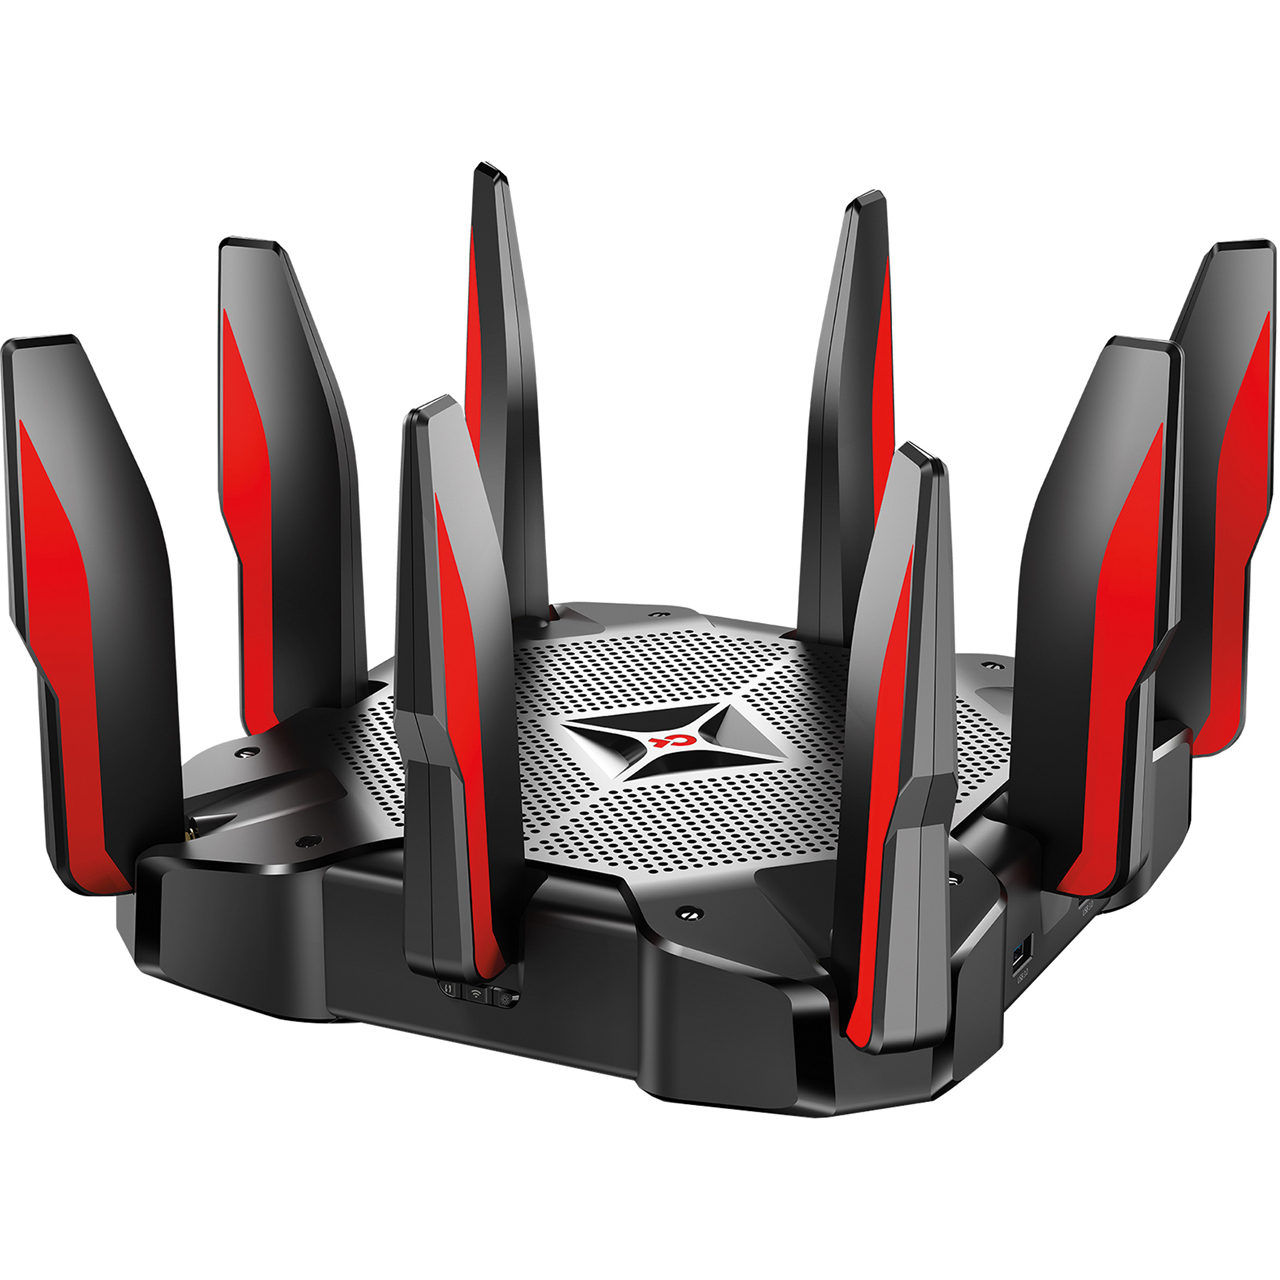 TP-Link Archer C5400X Triple Band AC5400 Gaming Wireless Router Review